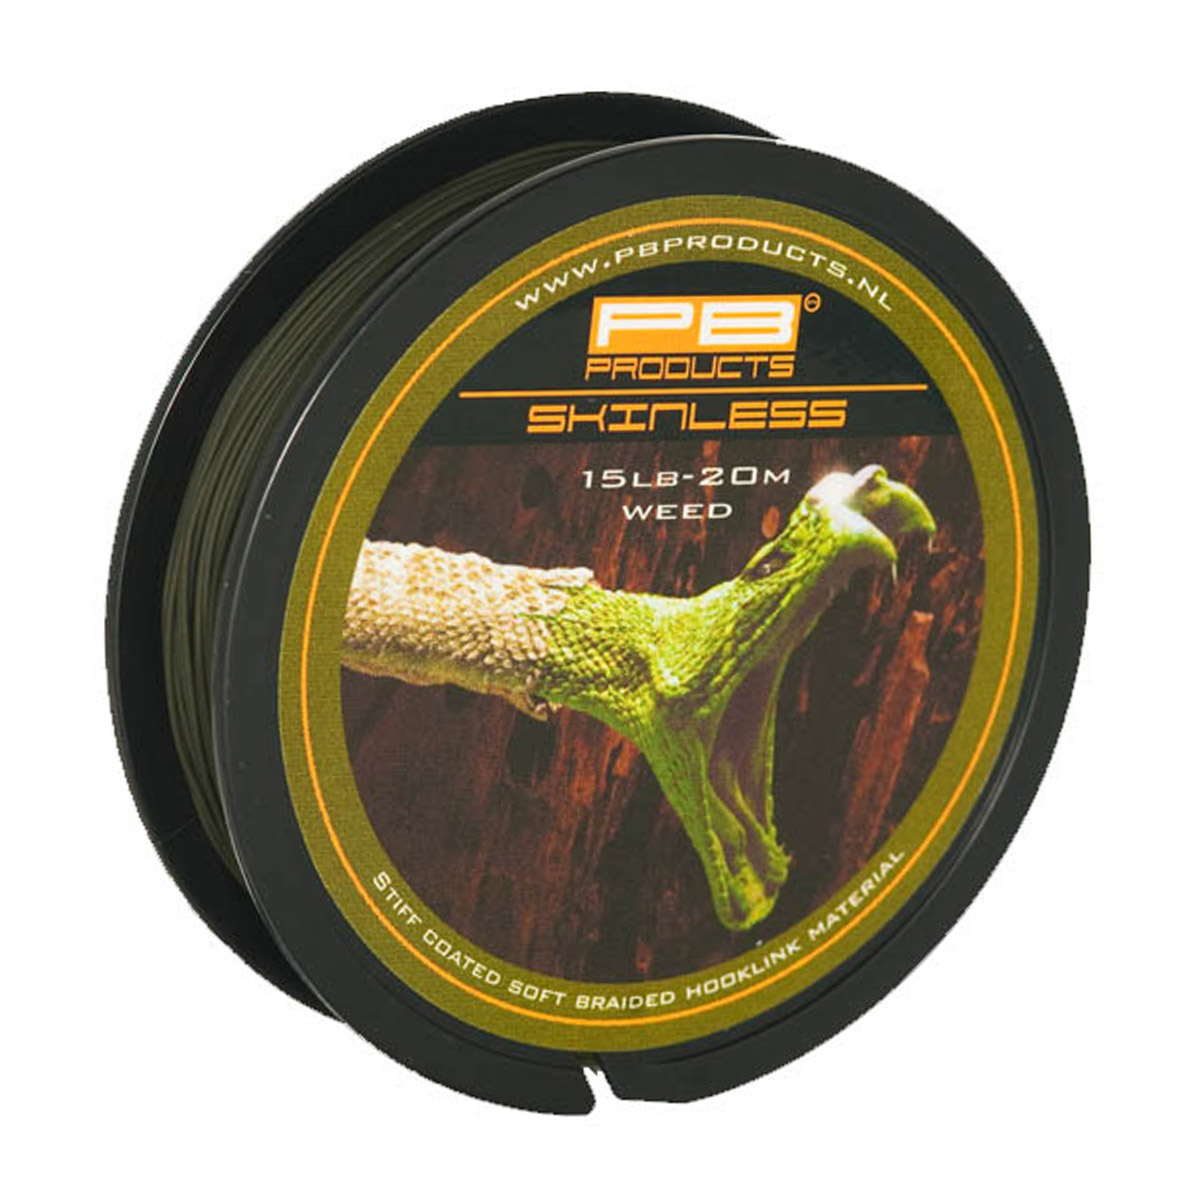 PB Products Skinless Weed 20 M -  25 lbs -  15 lbs